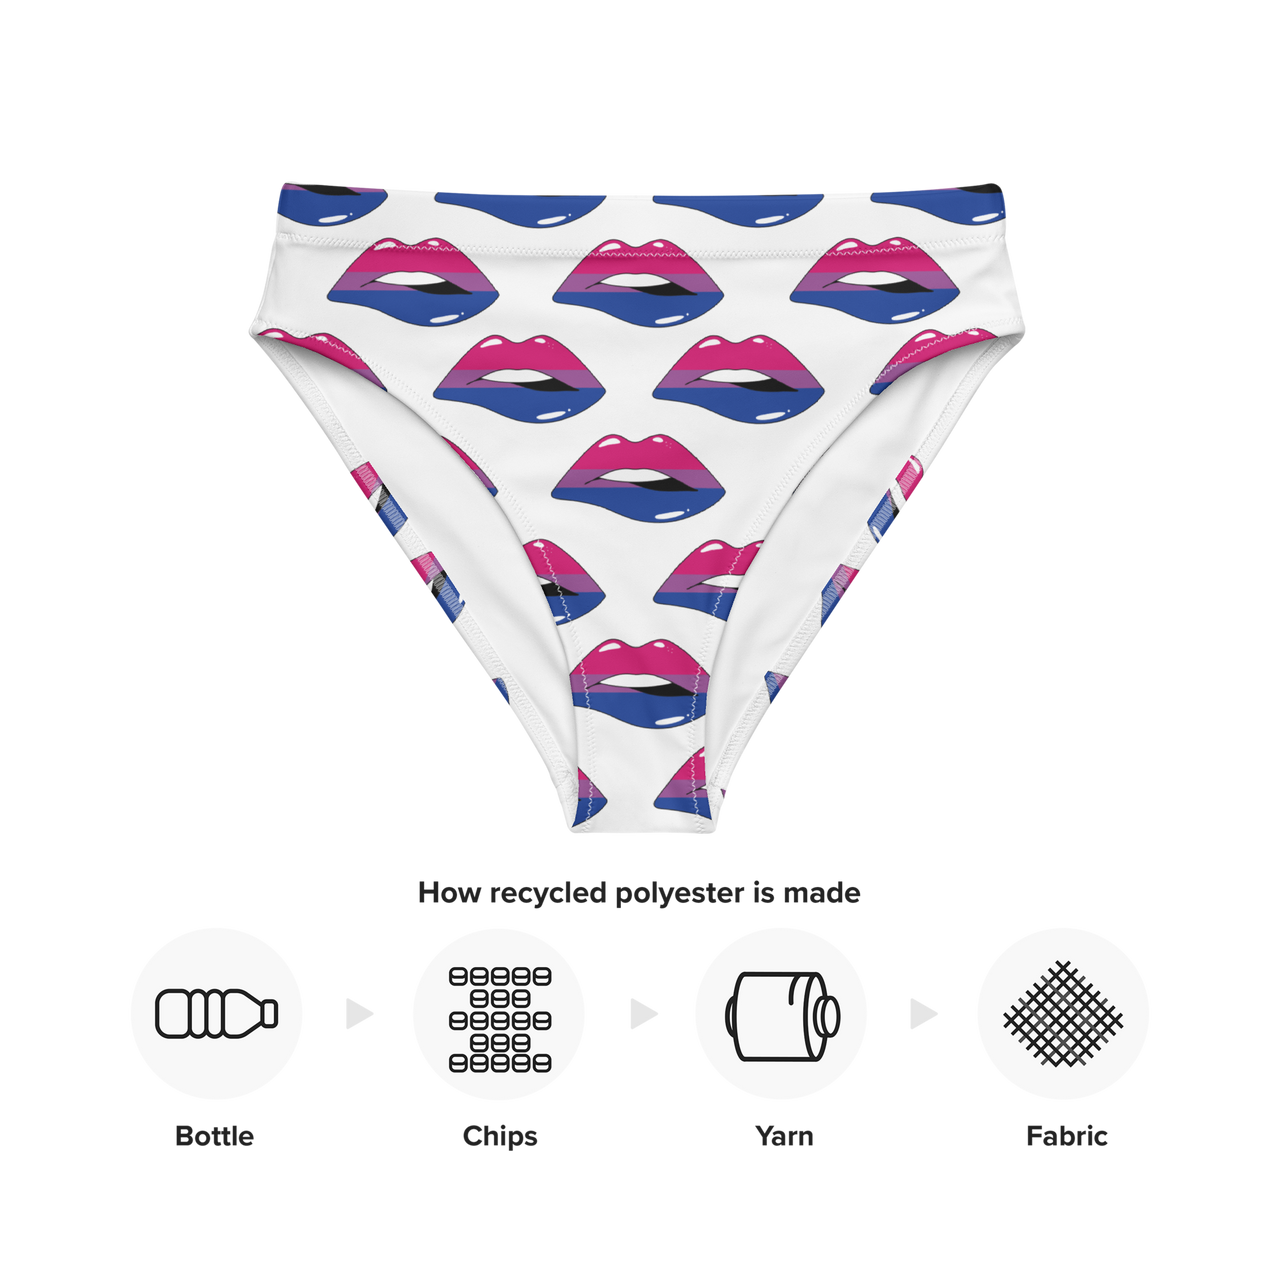 Bisexual Flag LGBTQ Kisses Underwear for They/Them Him/Her - White SHAVA